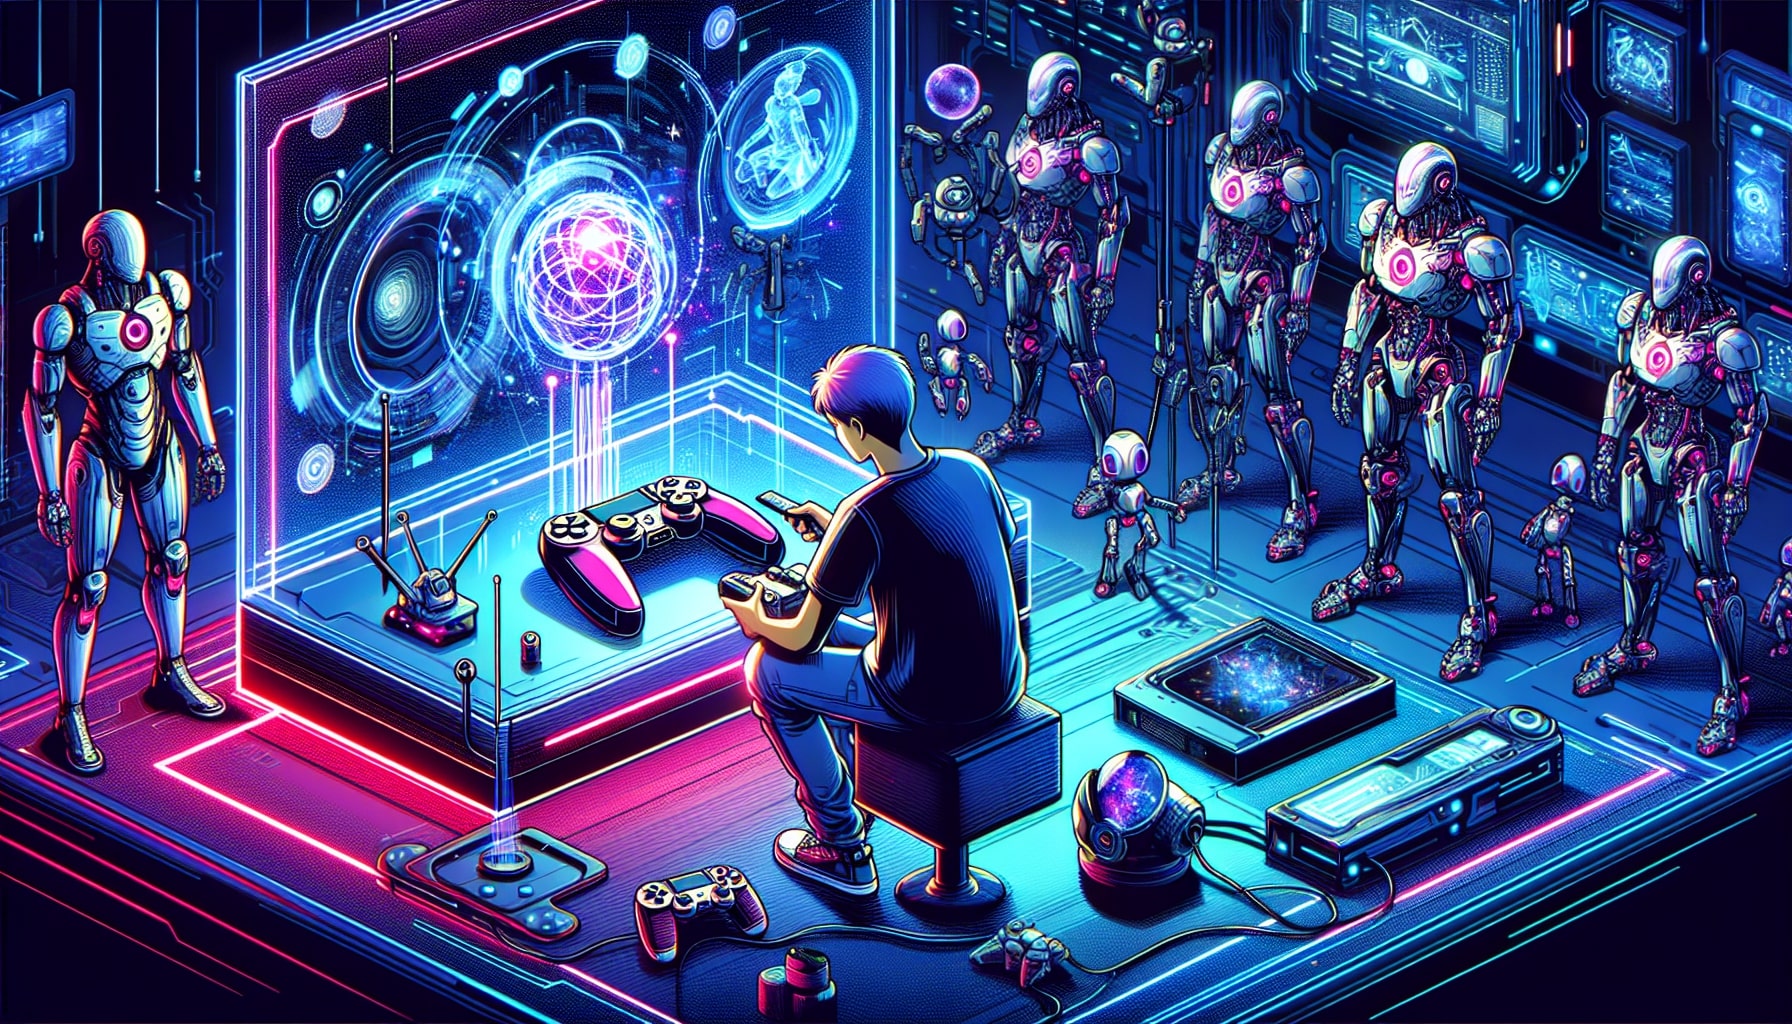 Futuristic gaming setup with robots and holograms.